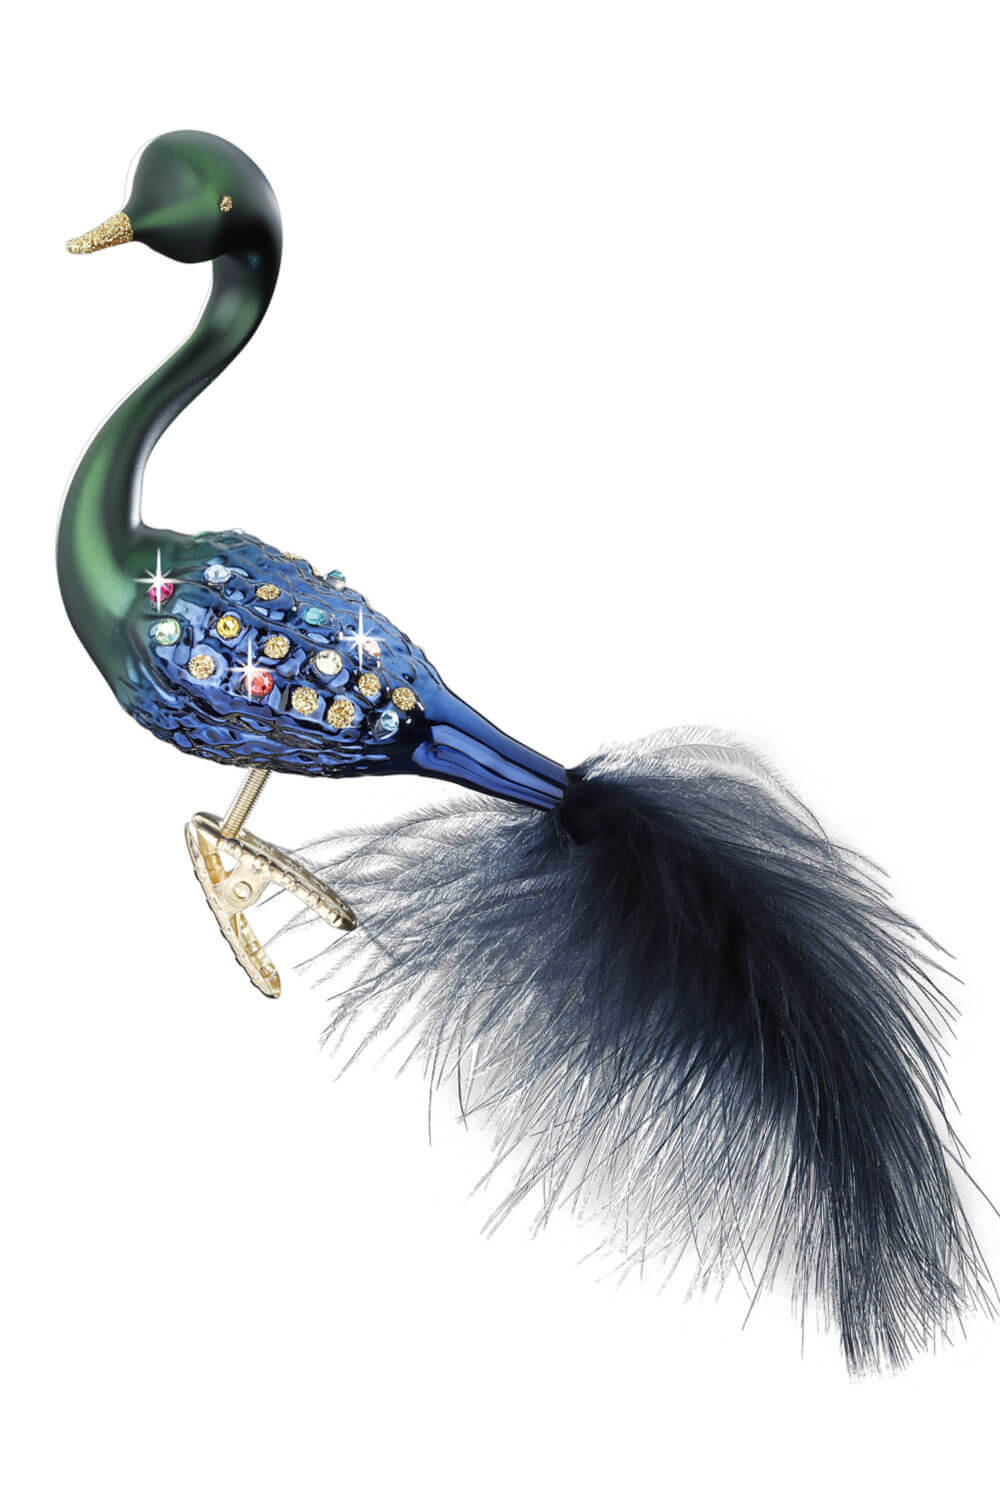 Sparkling Peacock [10100S022] - $55.44 : Heirlooms to Cherish